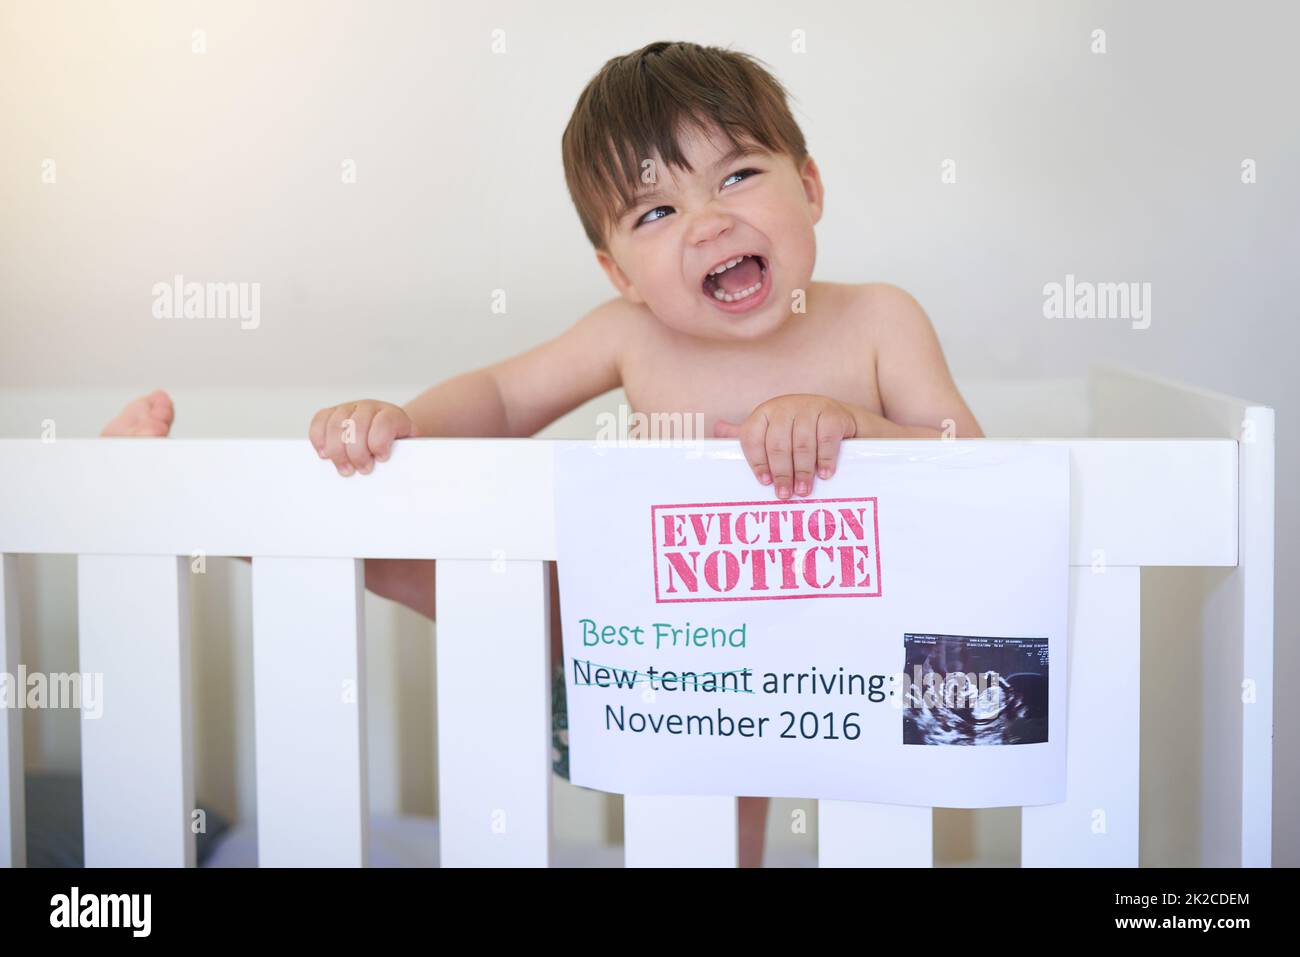 Making his objections heard. Shot of an unhappy baby boy crying while standing in his crib. Stock Photo